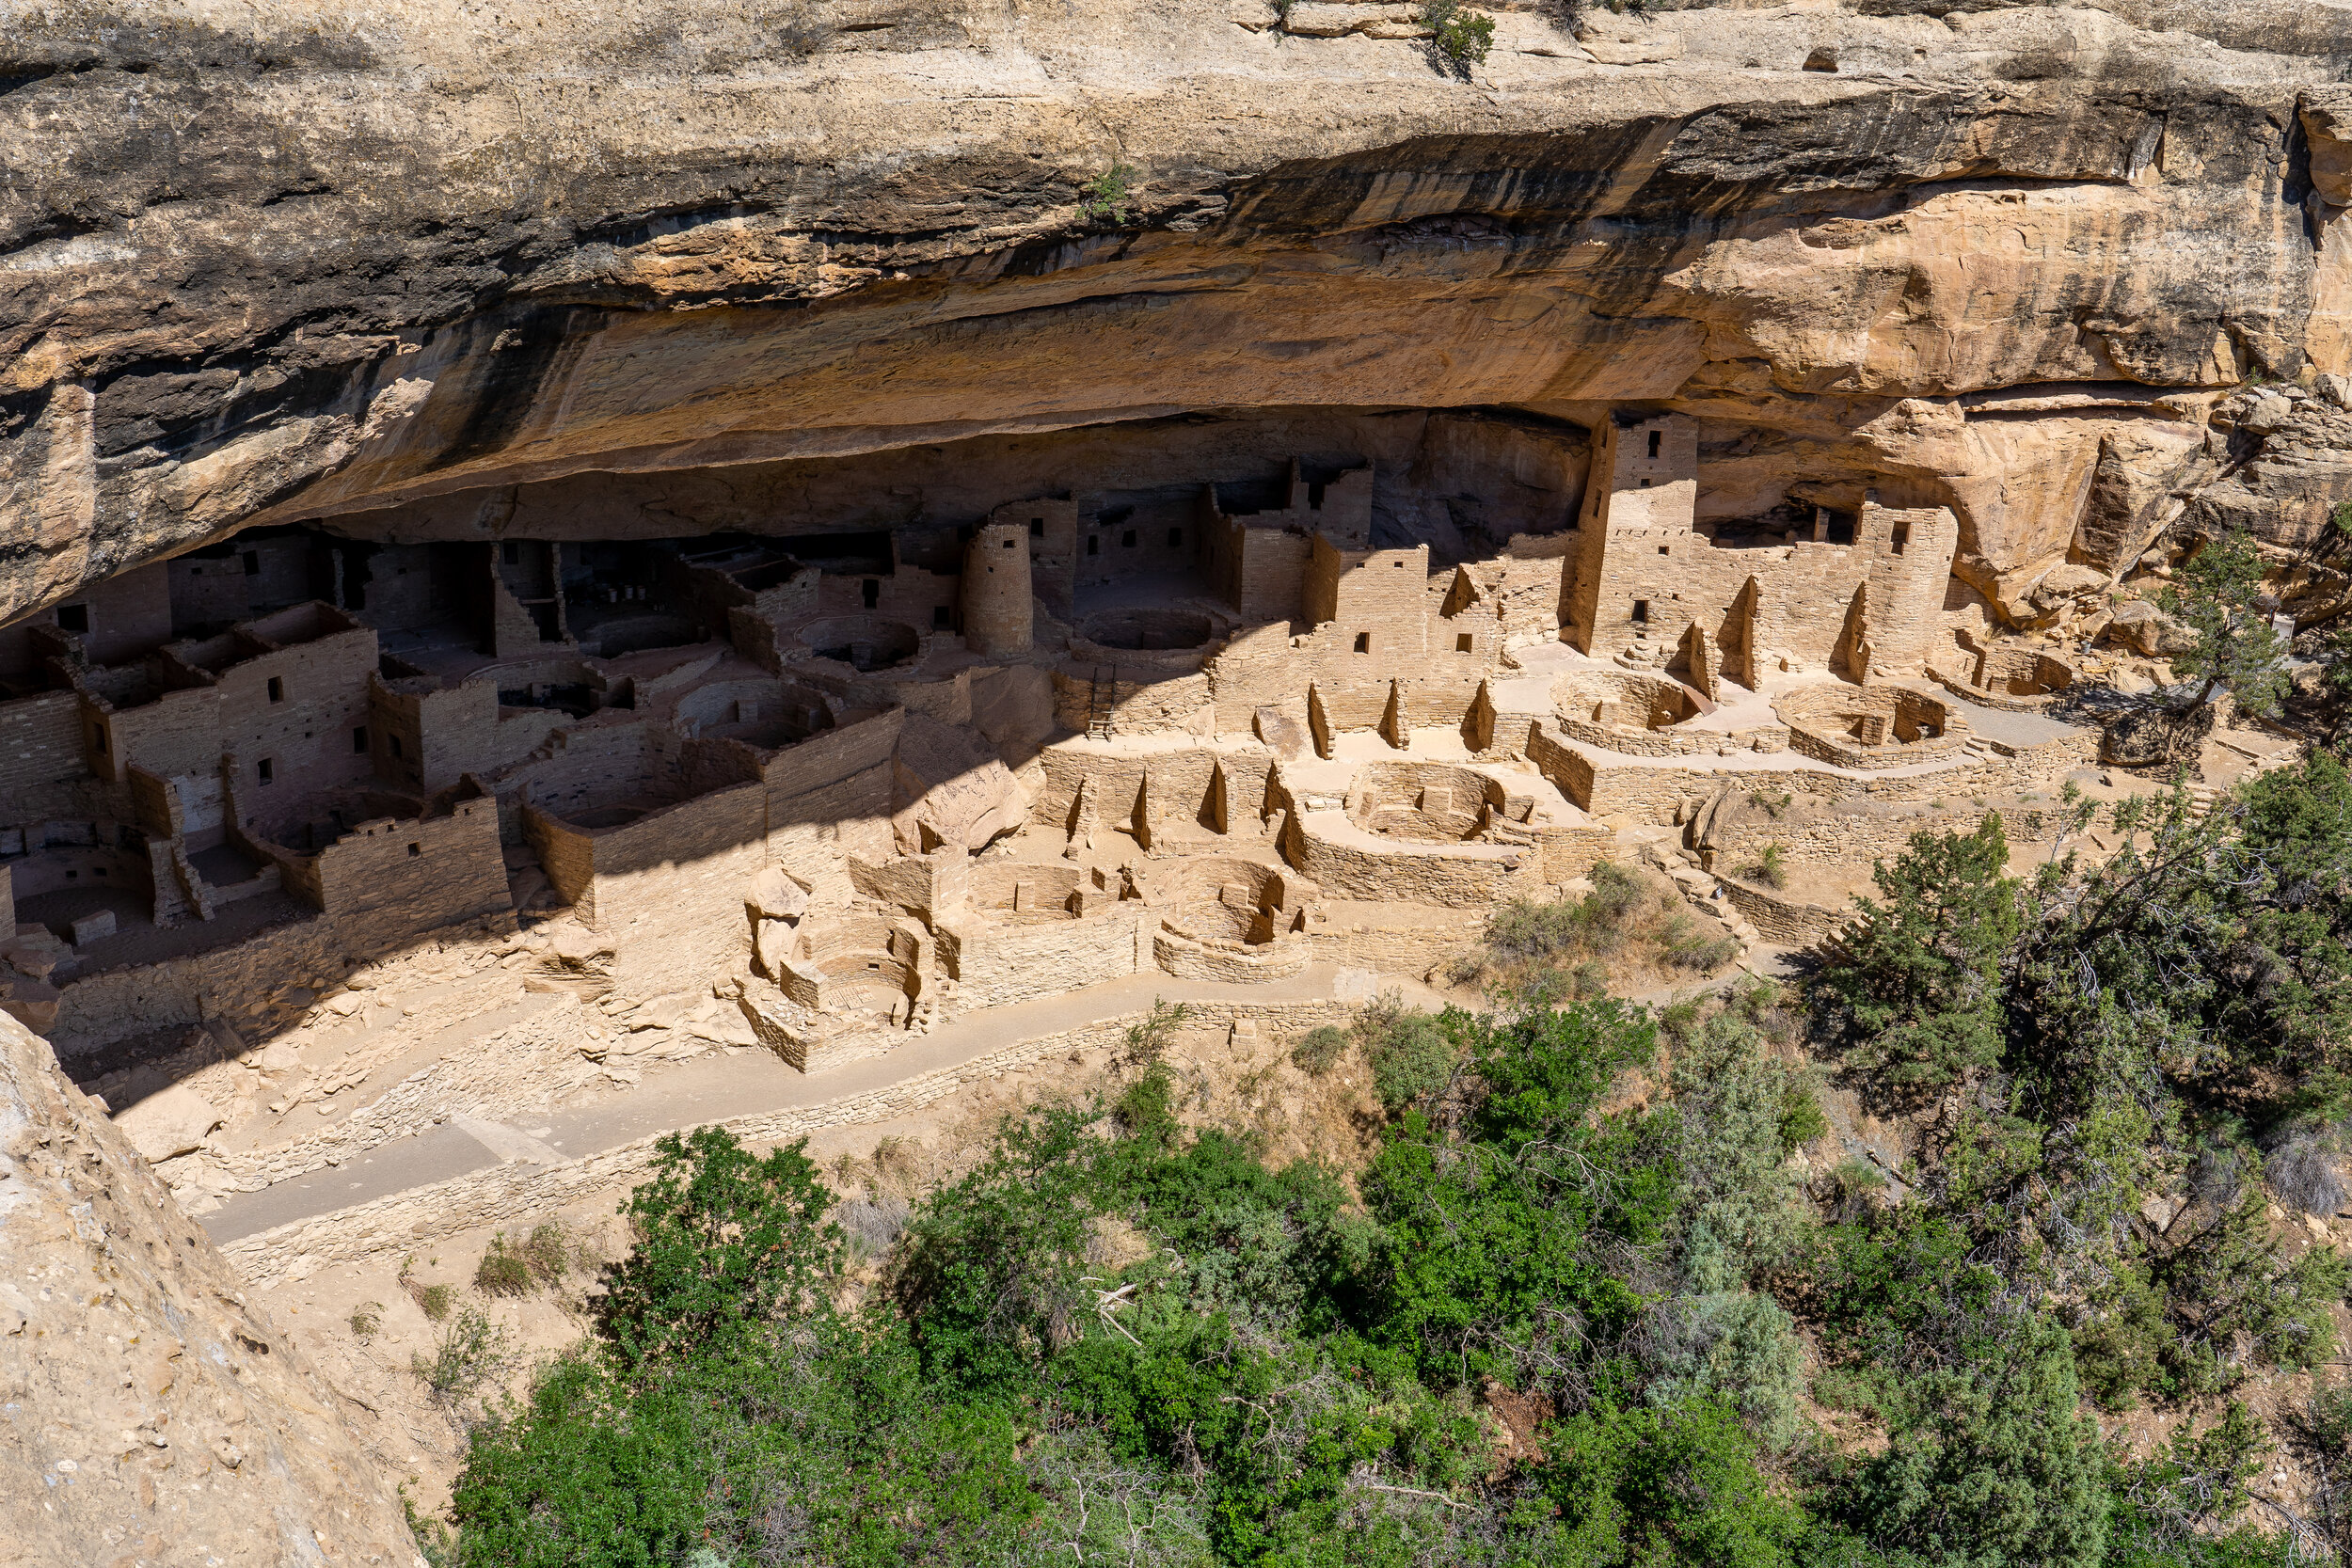  An incredible highlight of Mesa Verde NP is the cliff dwellings that were built over 800 years ago by the Pueblo Indians.  Long House , pictured here, is the second largest dwelling and has 150 rooms and 21 kivas (large rooms used for political and 